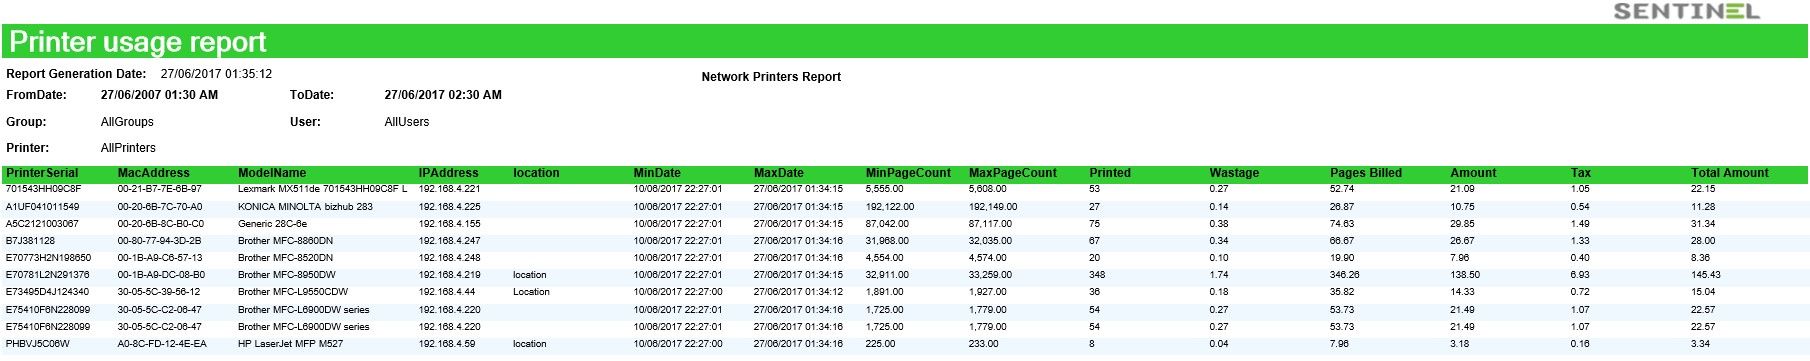 Print Usage Report collect MIBs data SNMP